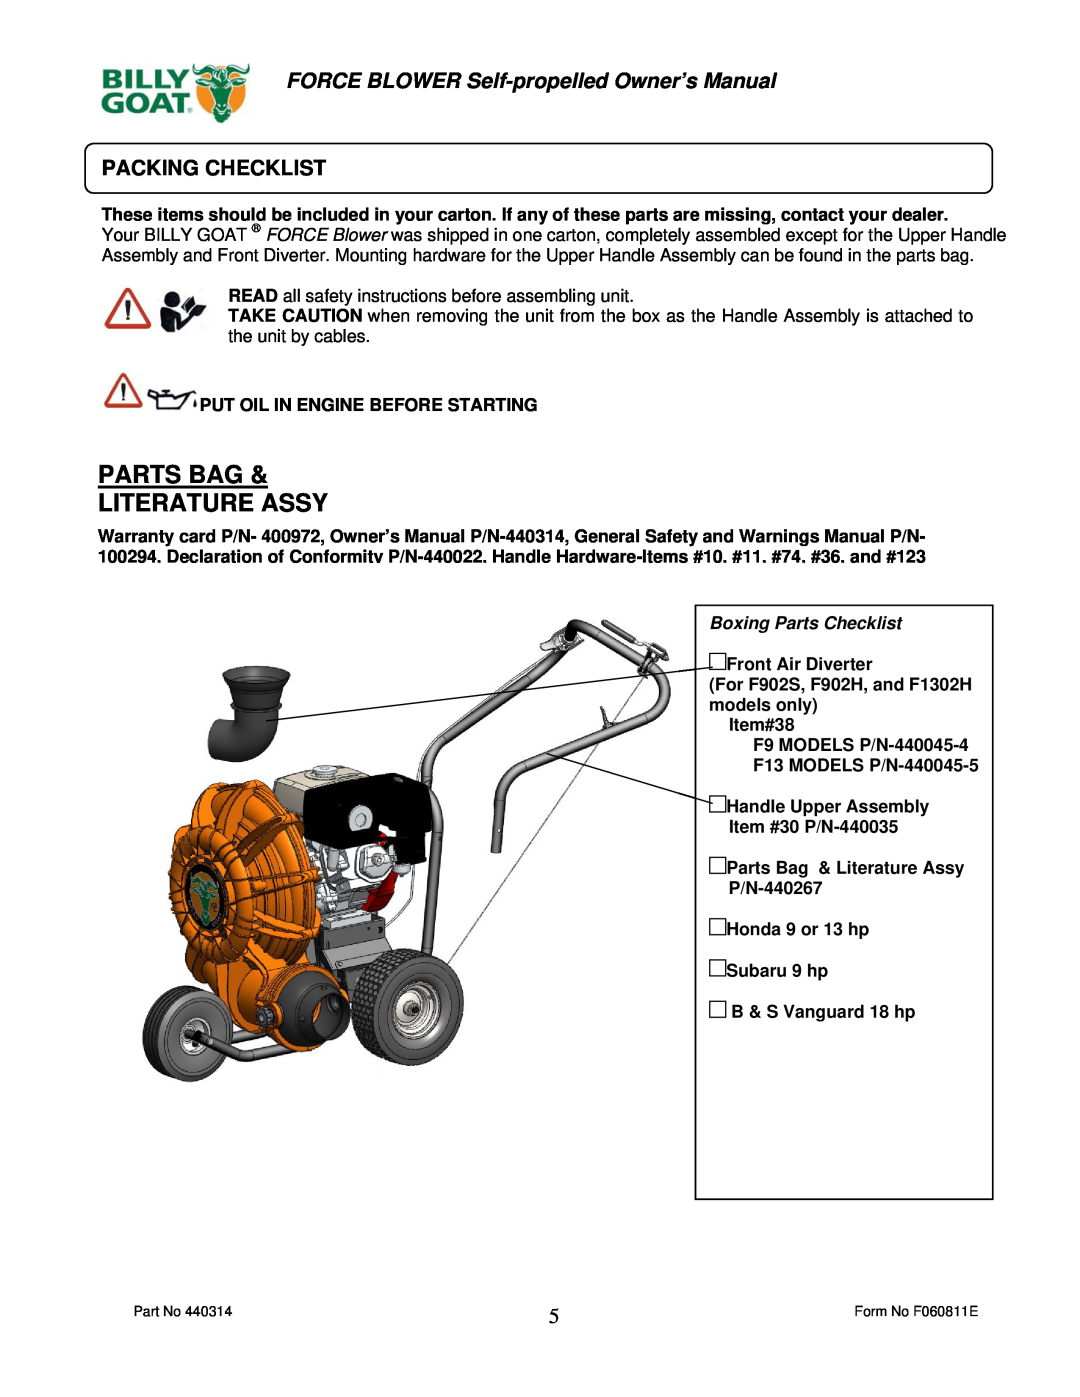 Billy Goat F902SPH, F902SPS Parts Bag Literature Assy, Packing Checklist, FORCE BLOWER Self-propelled Owner’s Manual 